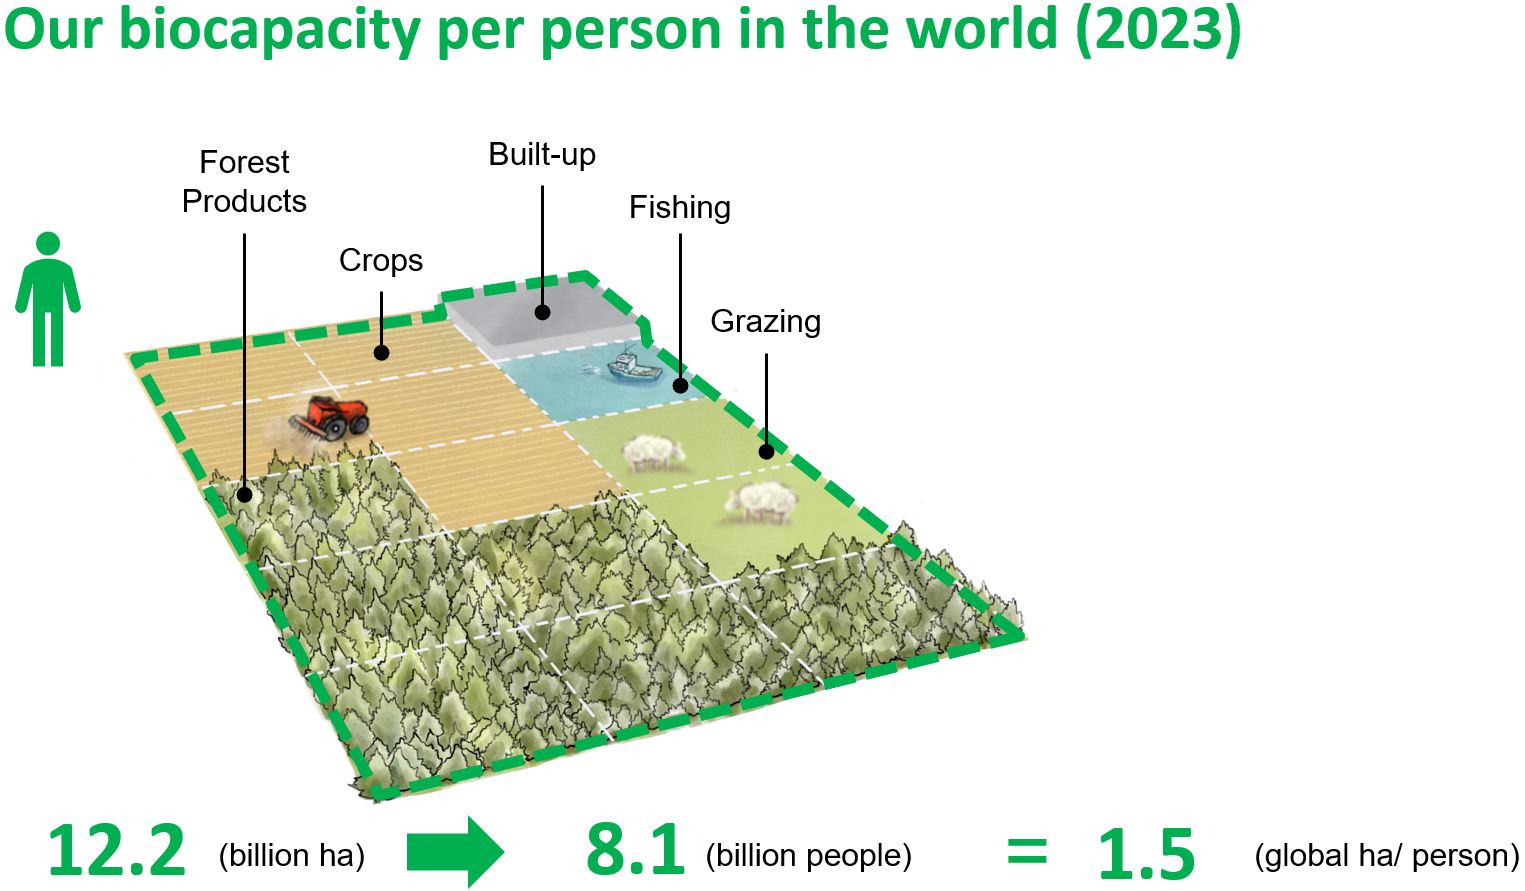 Given the population size, there is now 1.5 global hectares of biocapacity per person on our planet